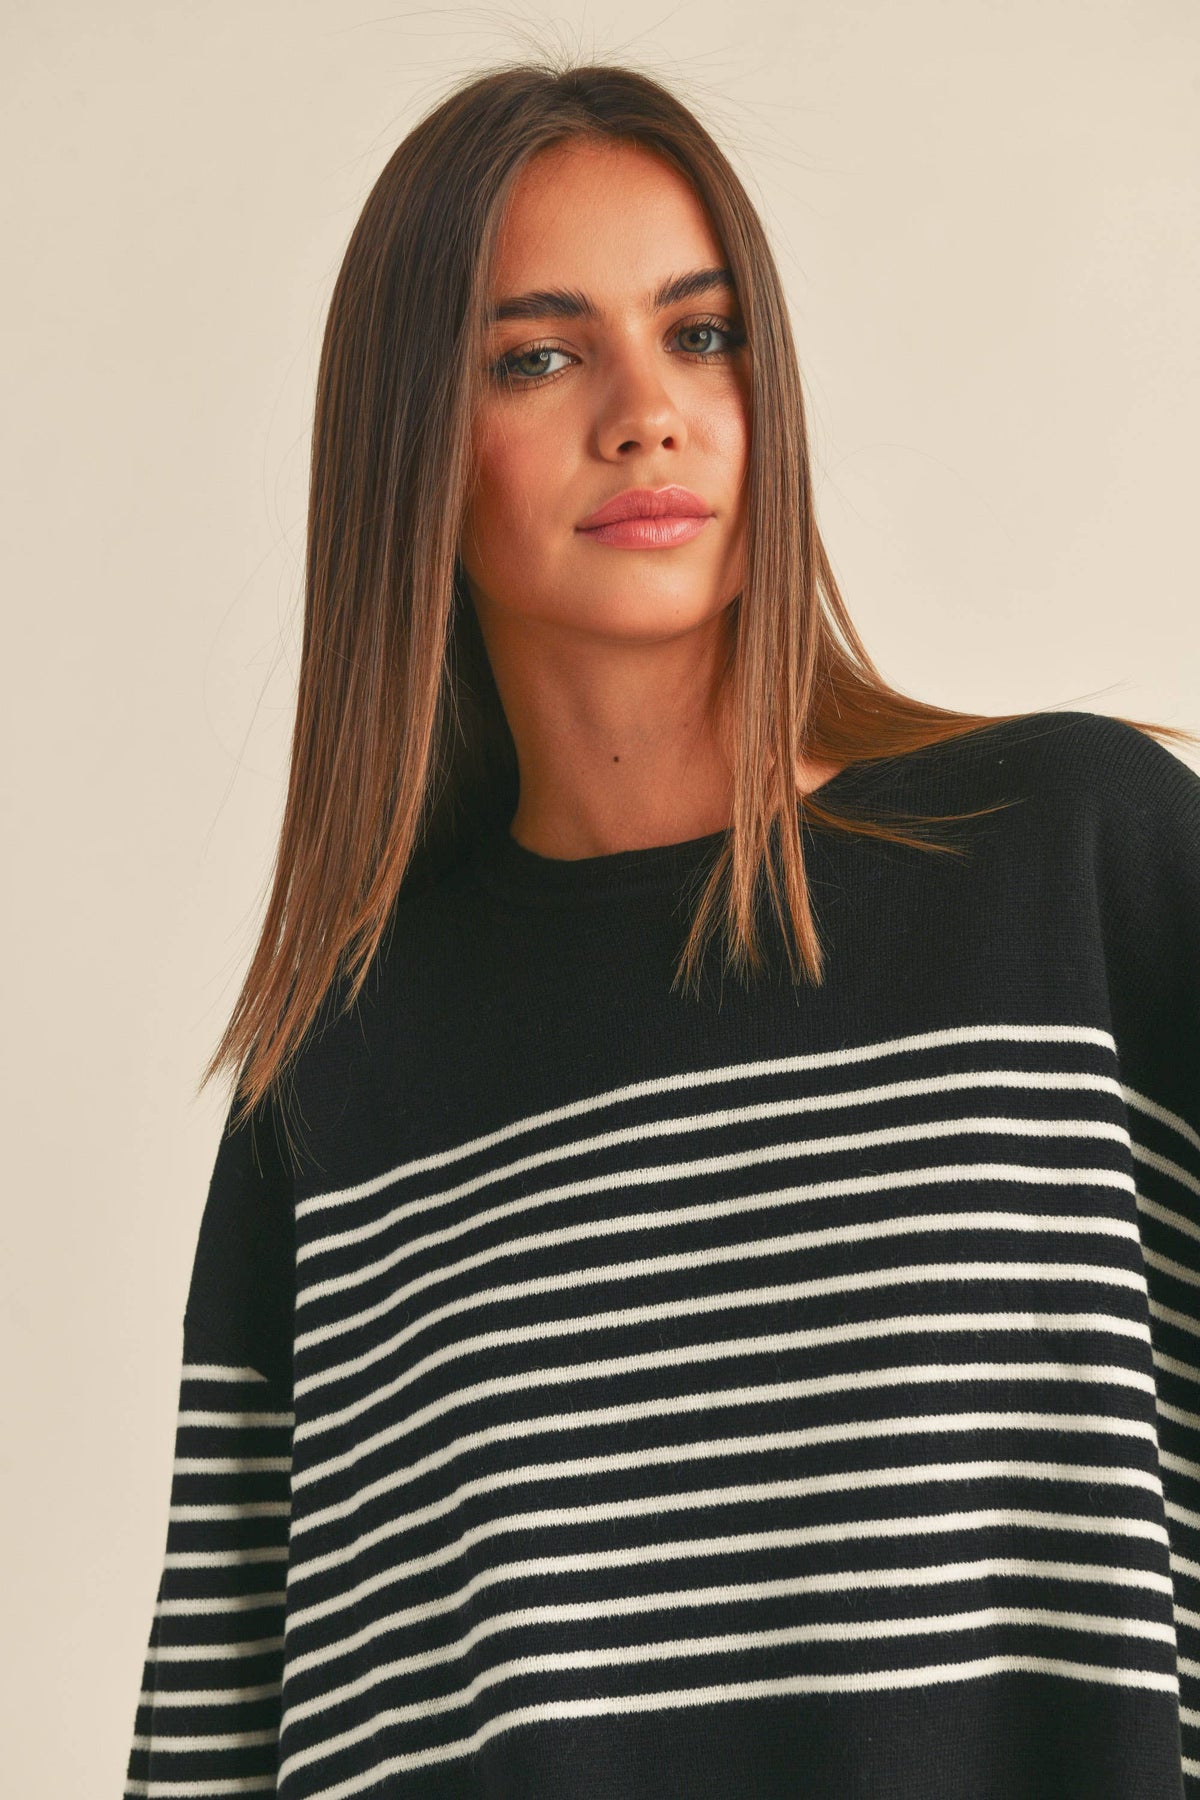 STRIPED WIDE SLEEVE KNITTED TOP - WHITE/BLACK